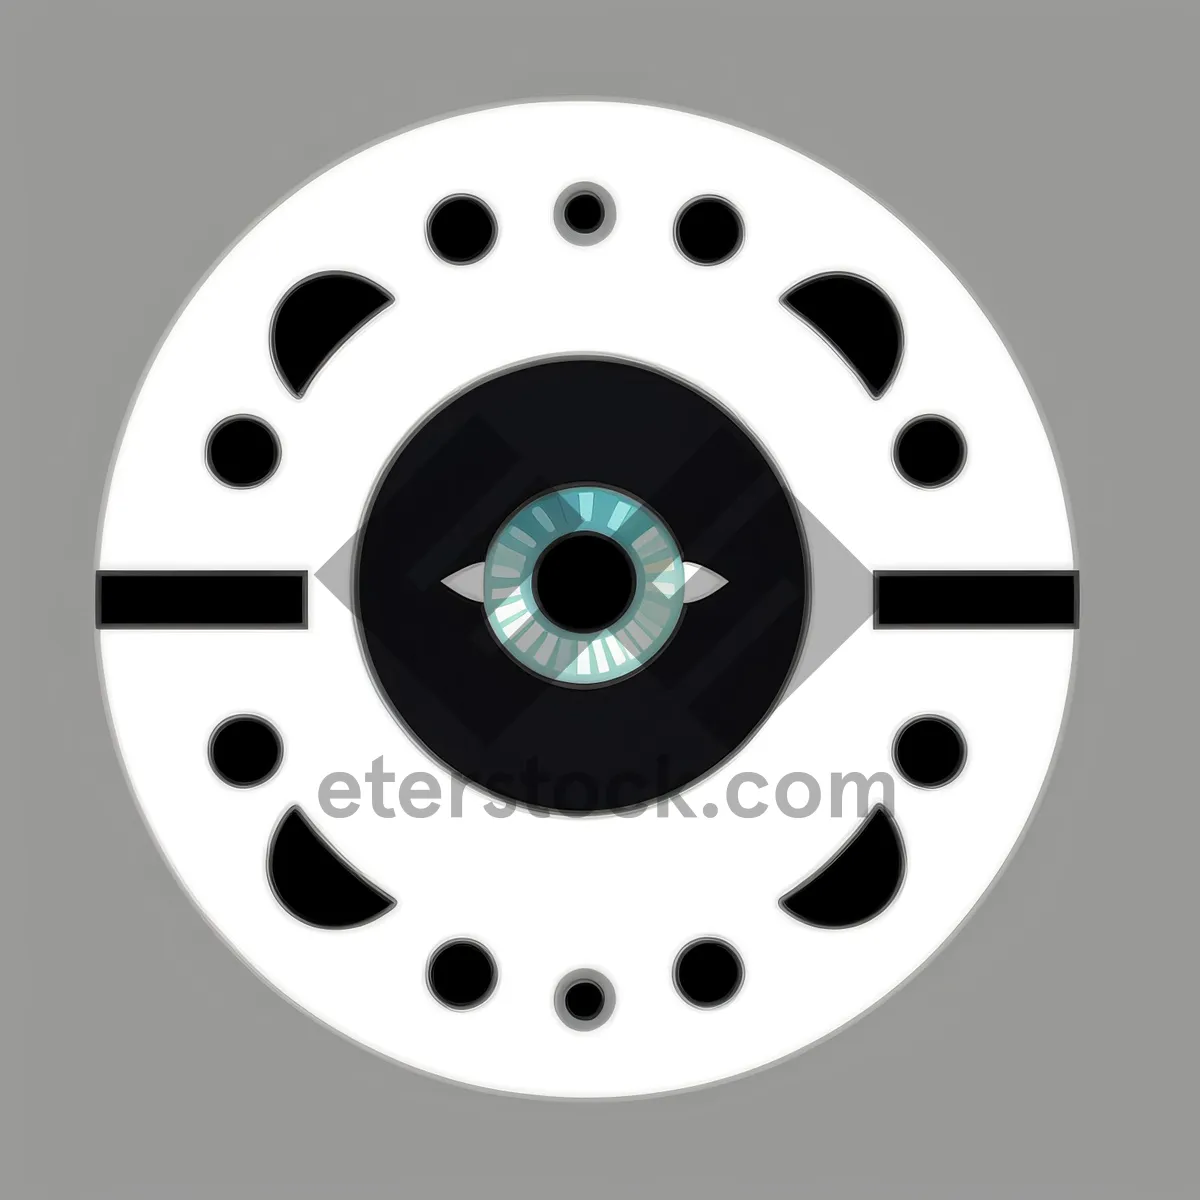 Picture of Metal Gear Circle Design Icon Button